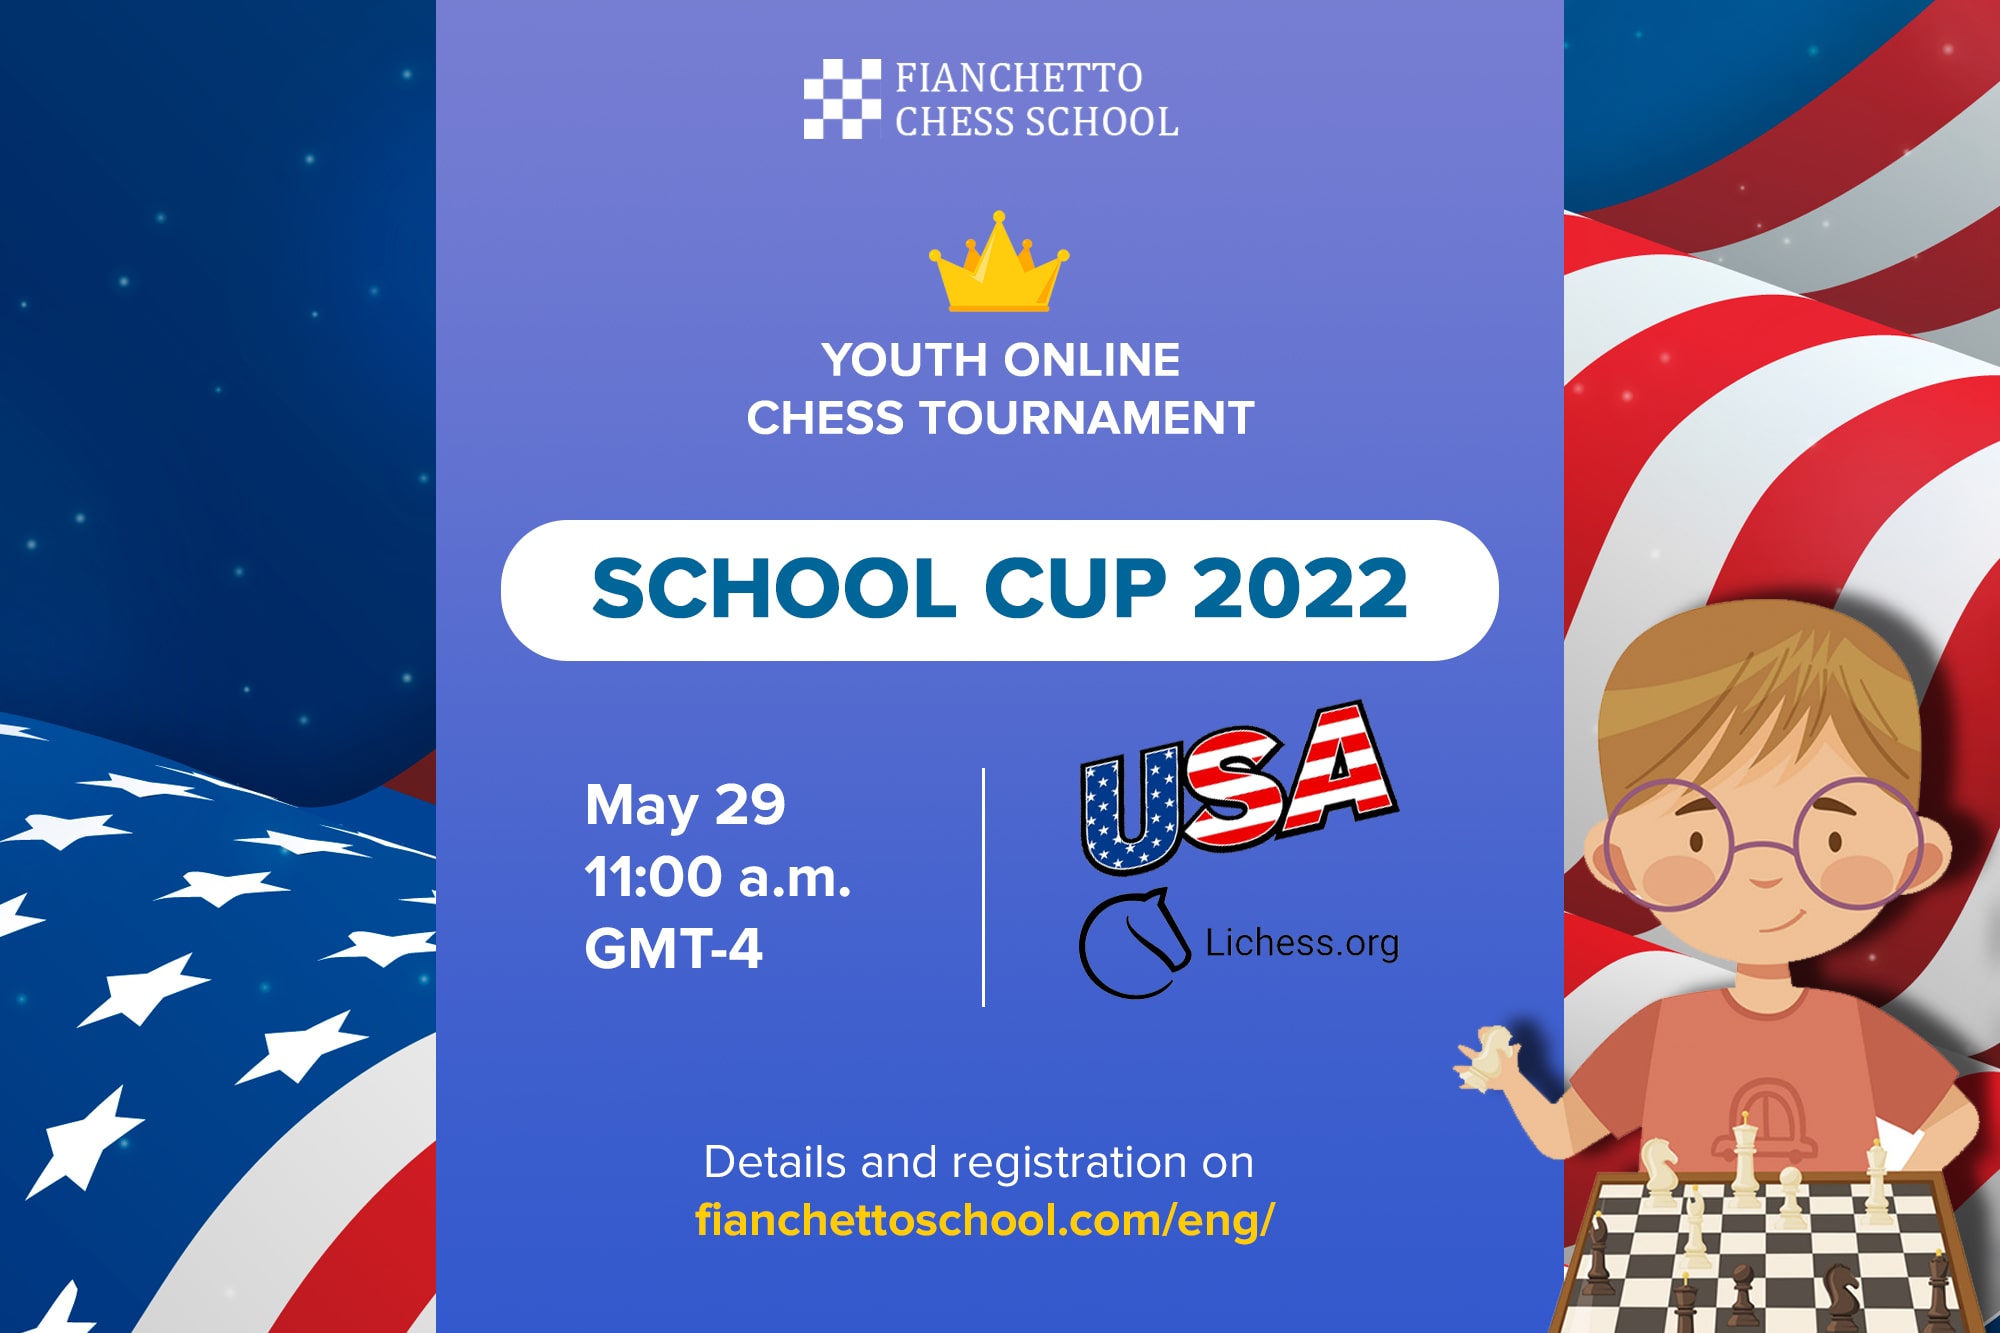 FIANCHETTO SCHOOL CHESS CUP 2022 USA - ONLINE YOUTH TOURNAMENT